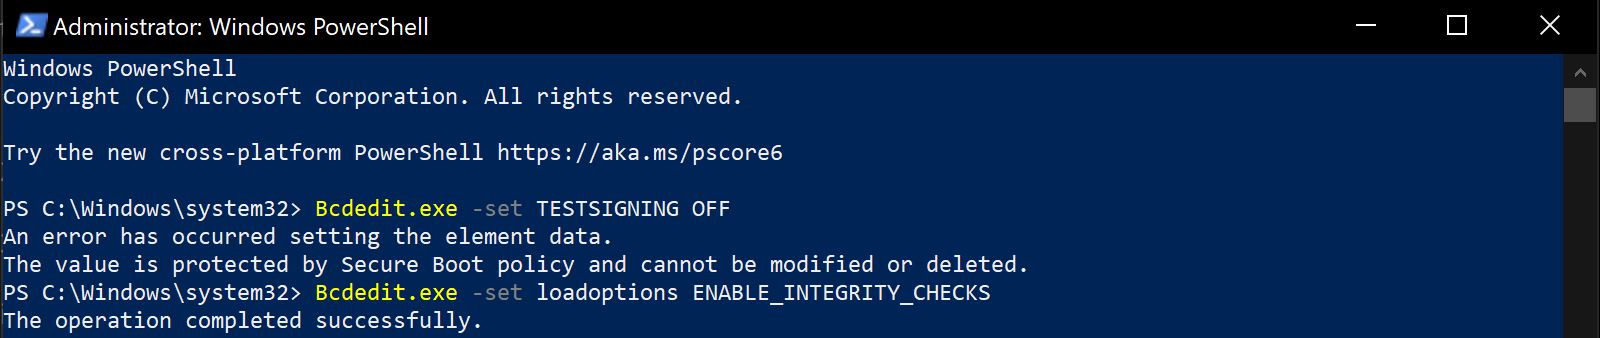 turning test mode off in powershell